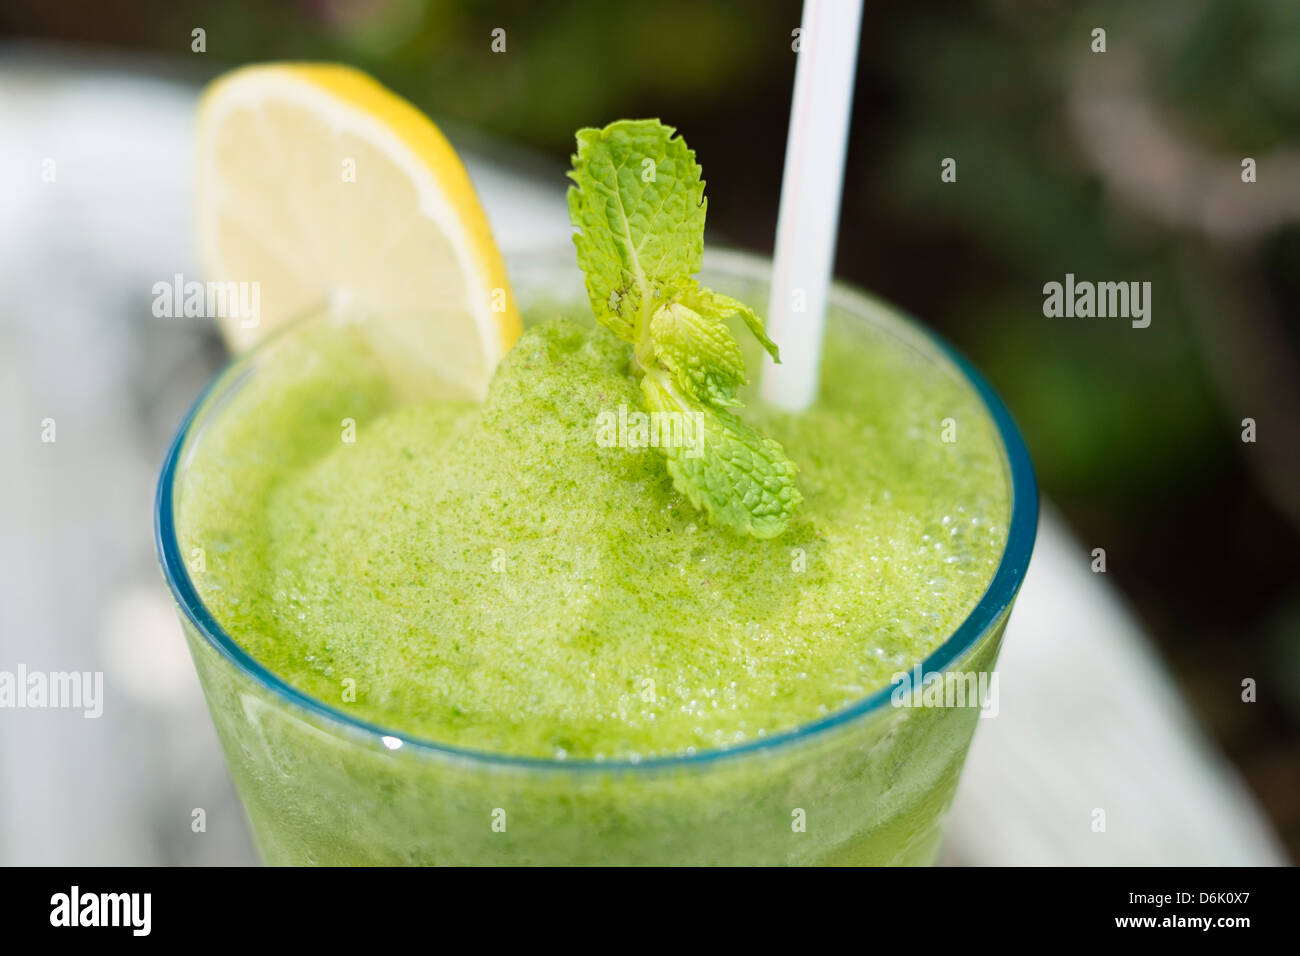 Traditional Lemon and mint drink popular refreshment in in the Middle East Stock Photo